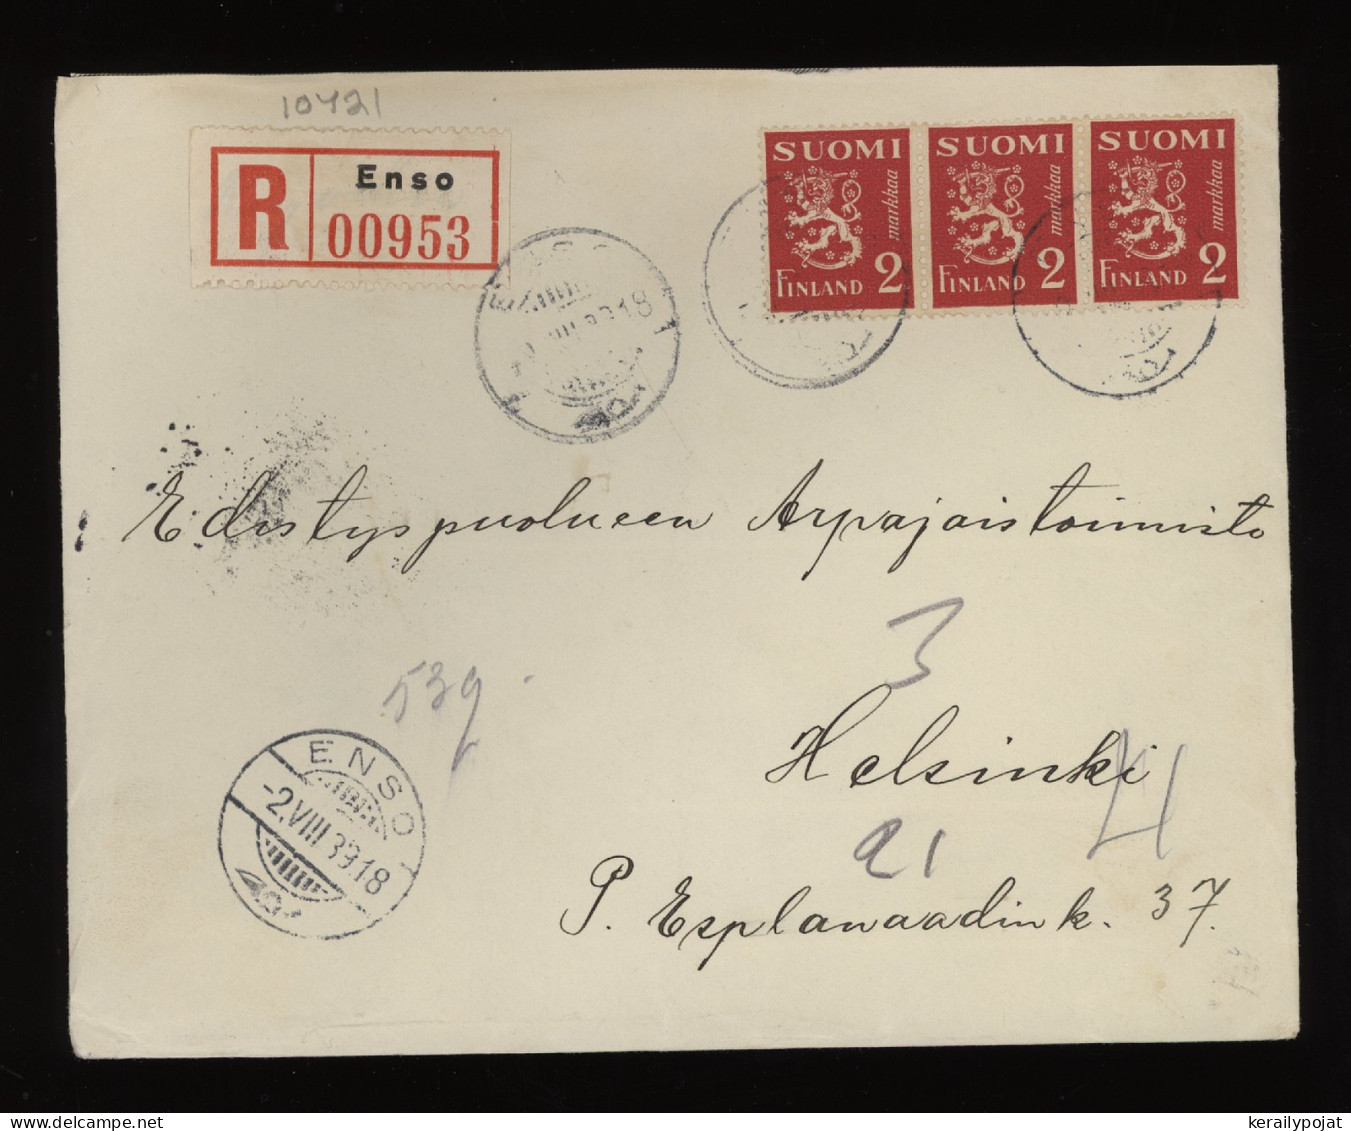 Finland 1939 Enso Registered Cover__(10421) - Covers & Documents